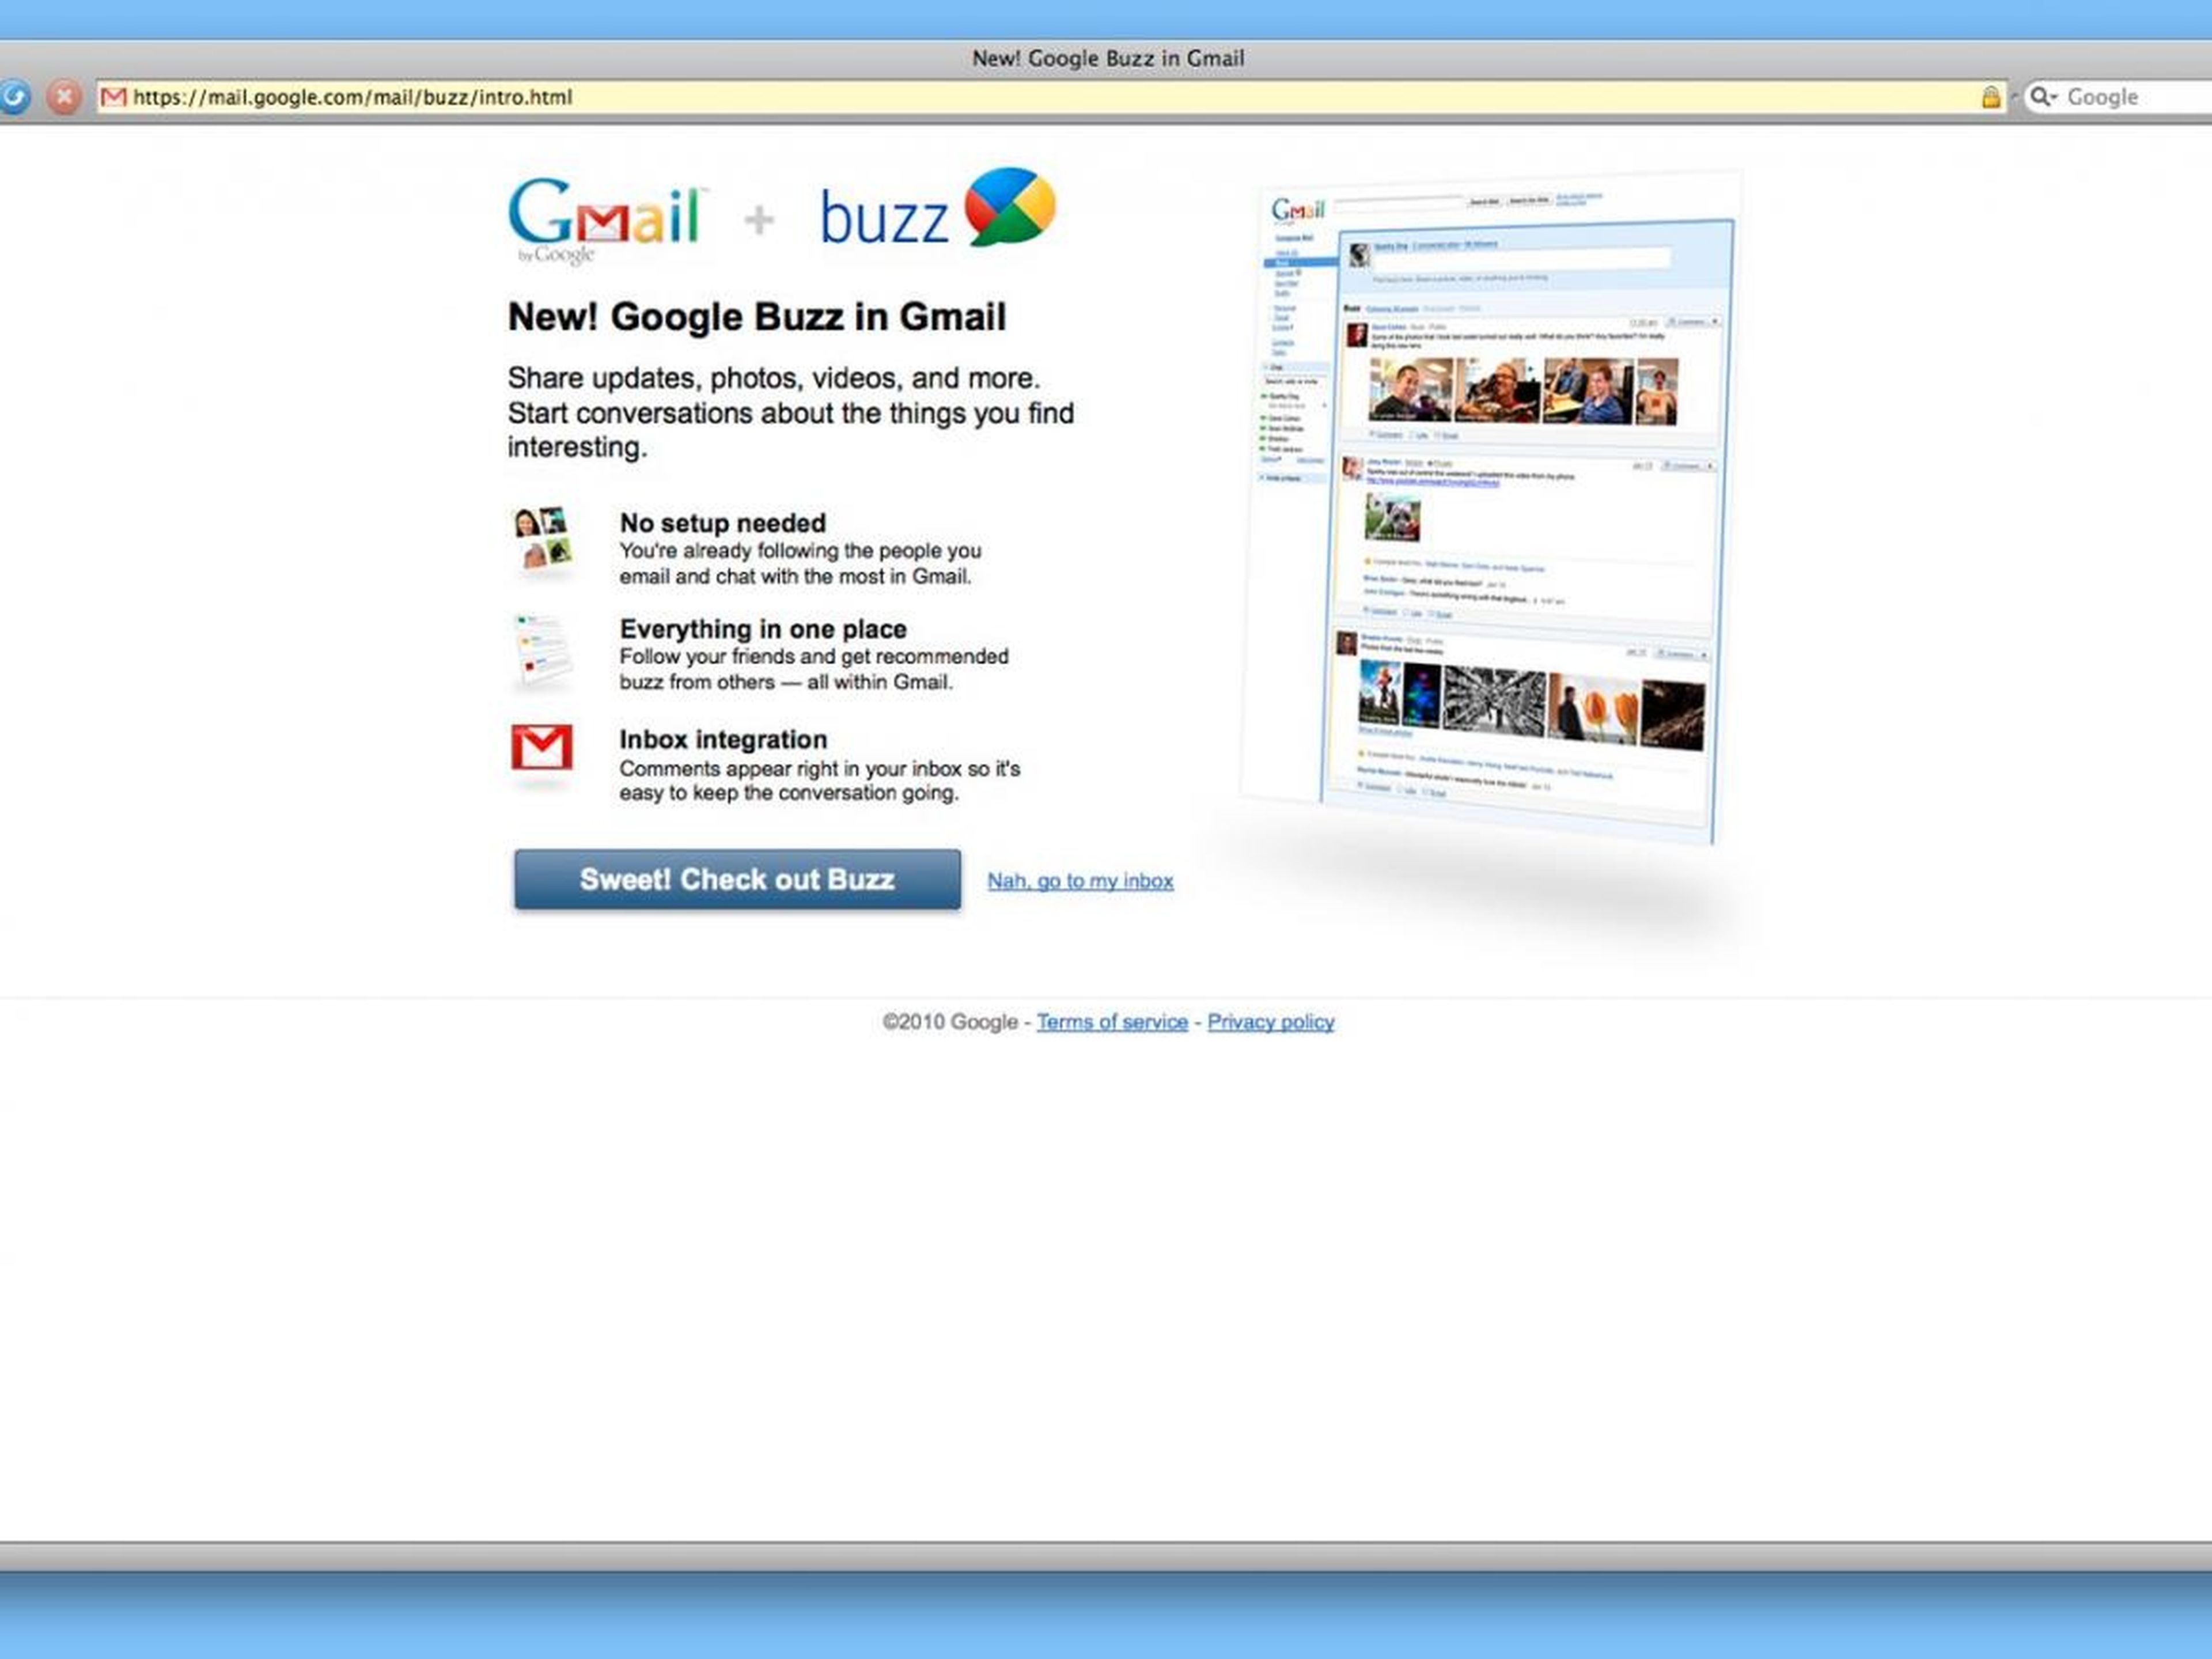 Google Buzz was a social-networking service that was integrated into Gmail, but it was plagued with problematic privacy issues and never caught on. The company announced in October 2011 it would shut down the service to focus on